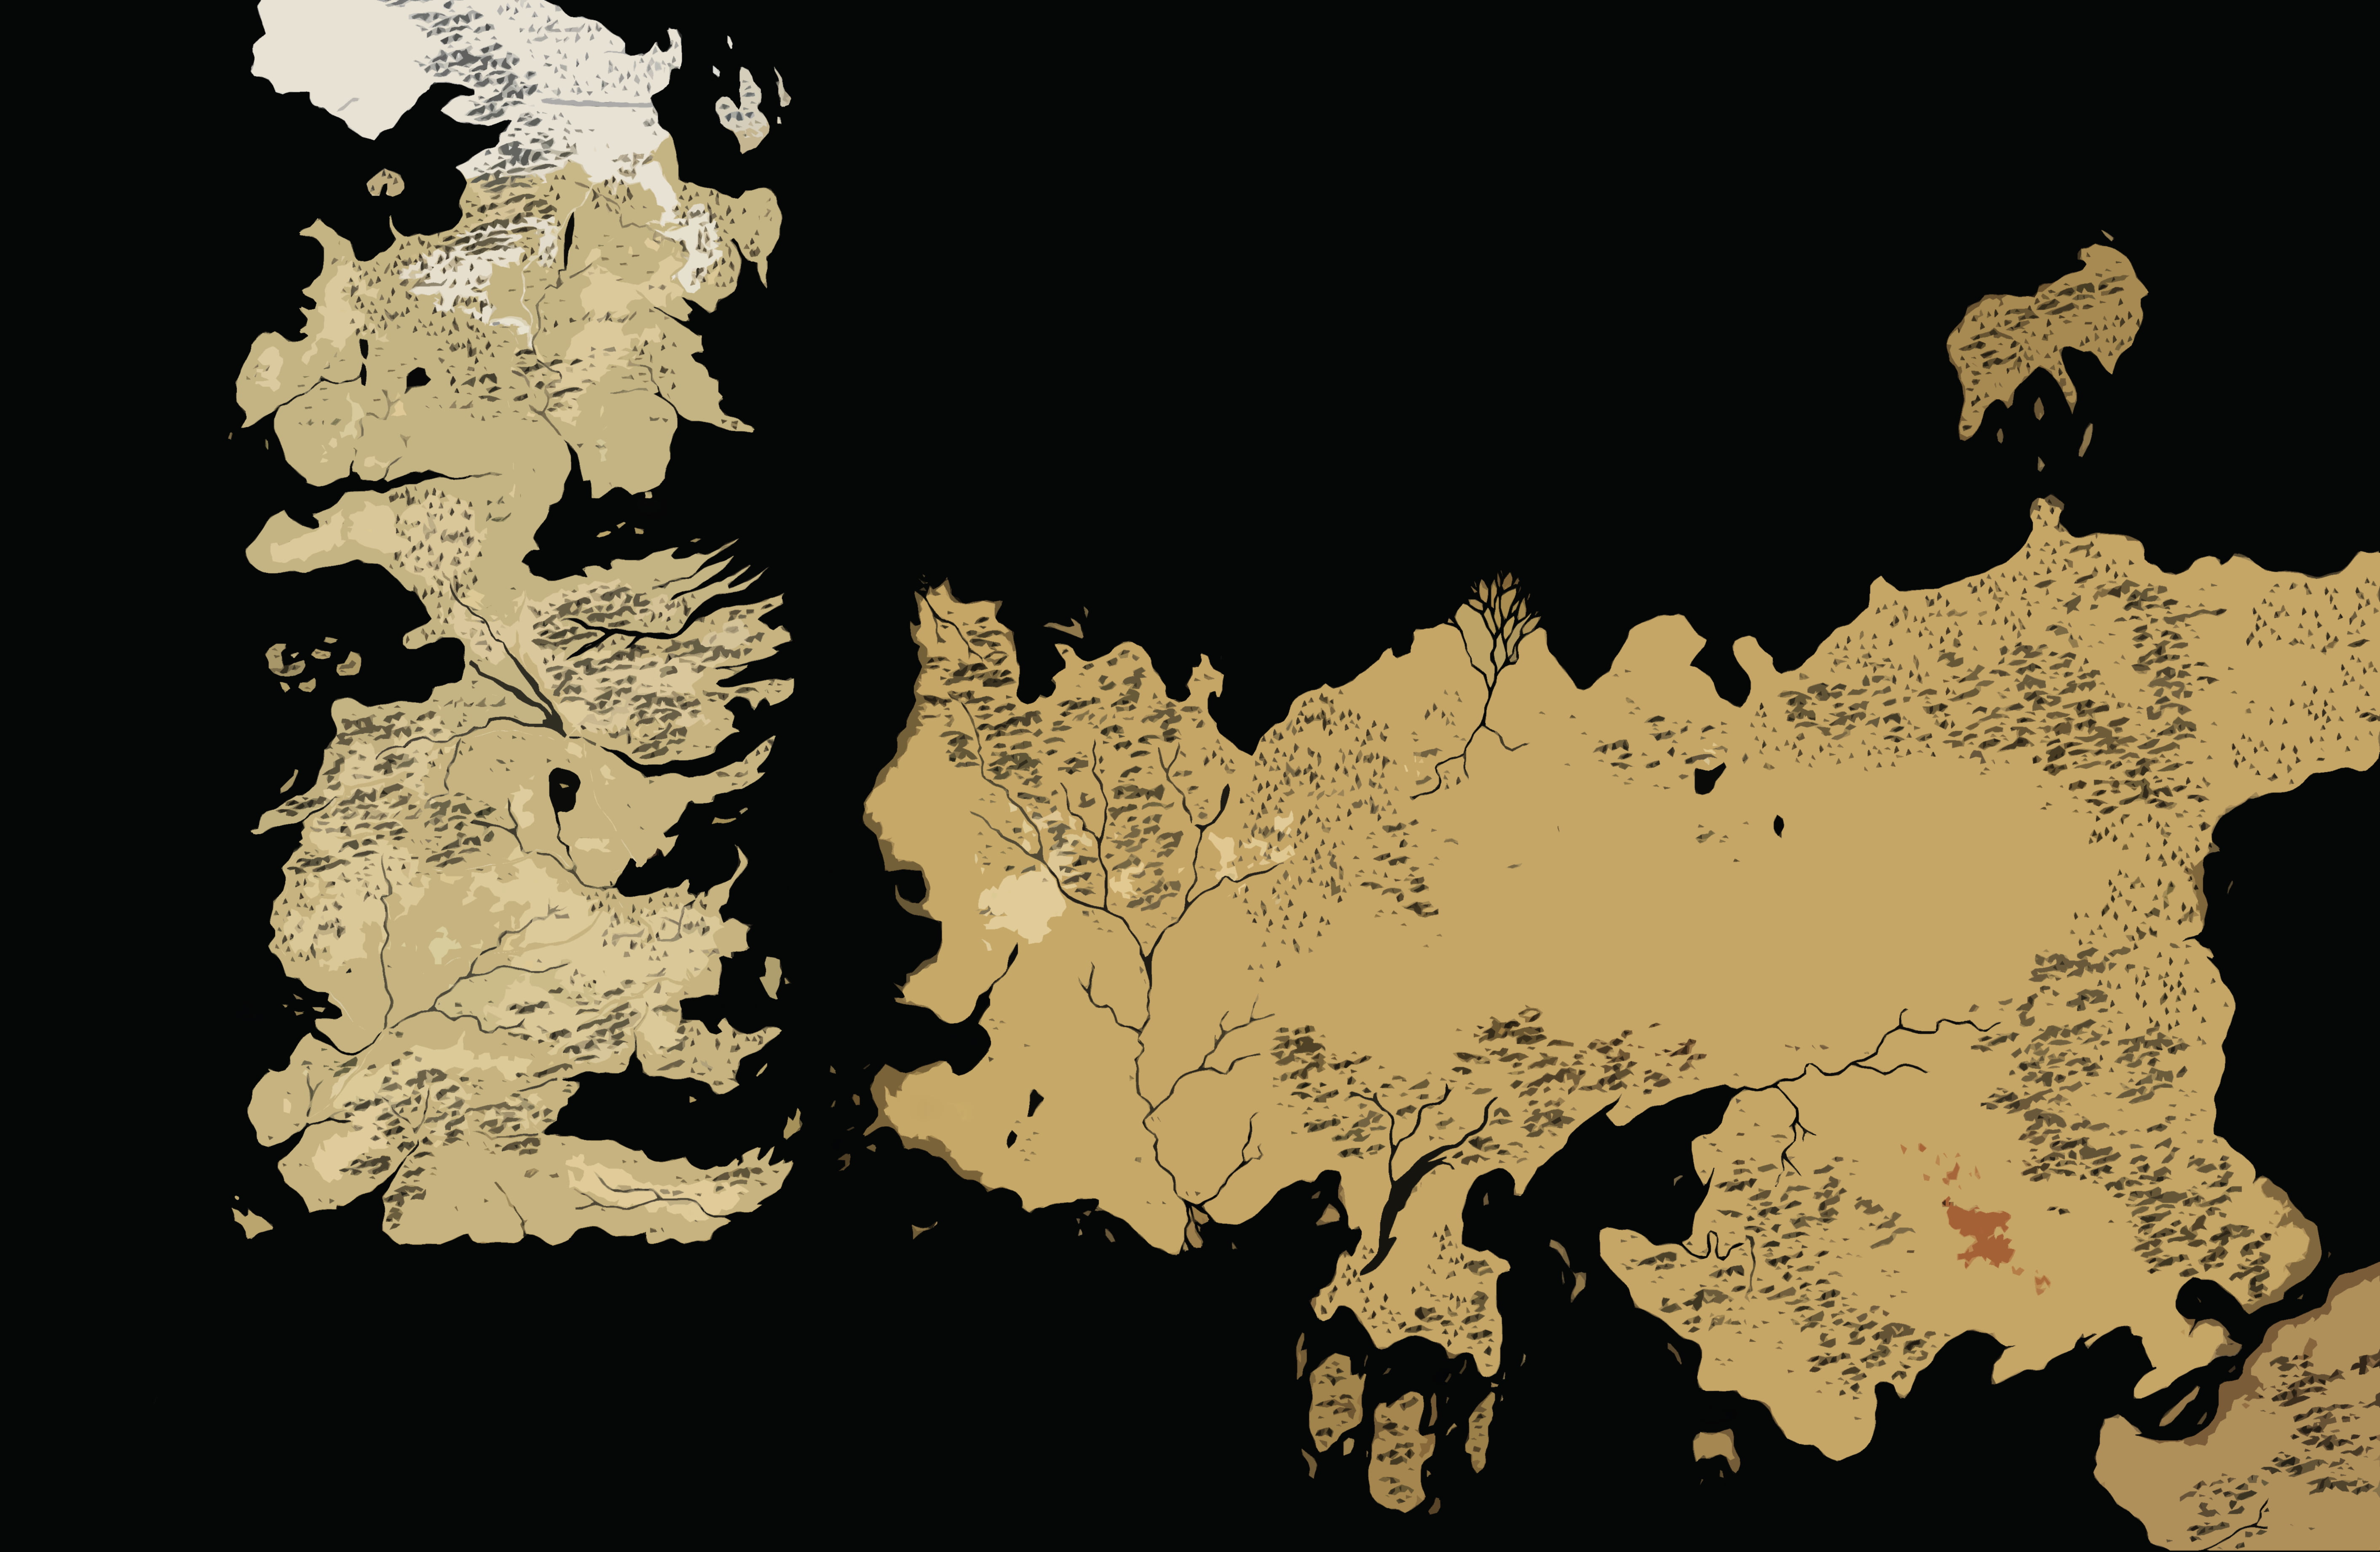 Game of Thrones, Westeros, minimalism, low poly, map